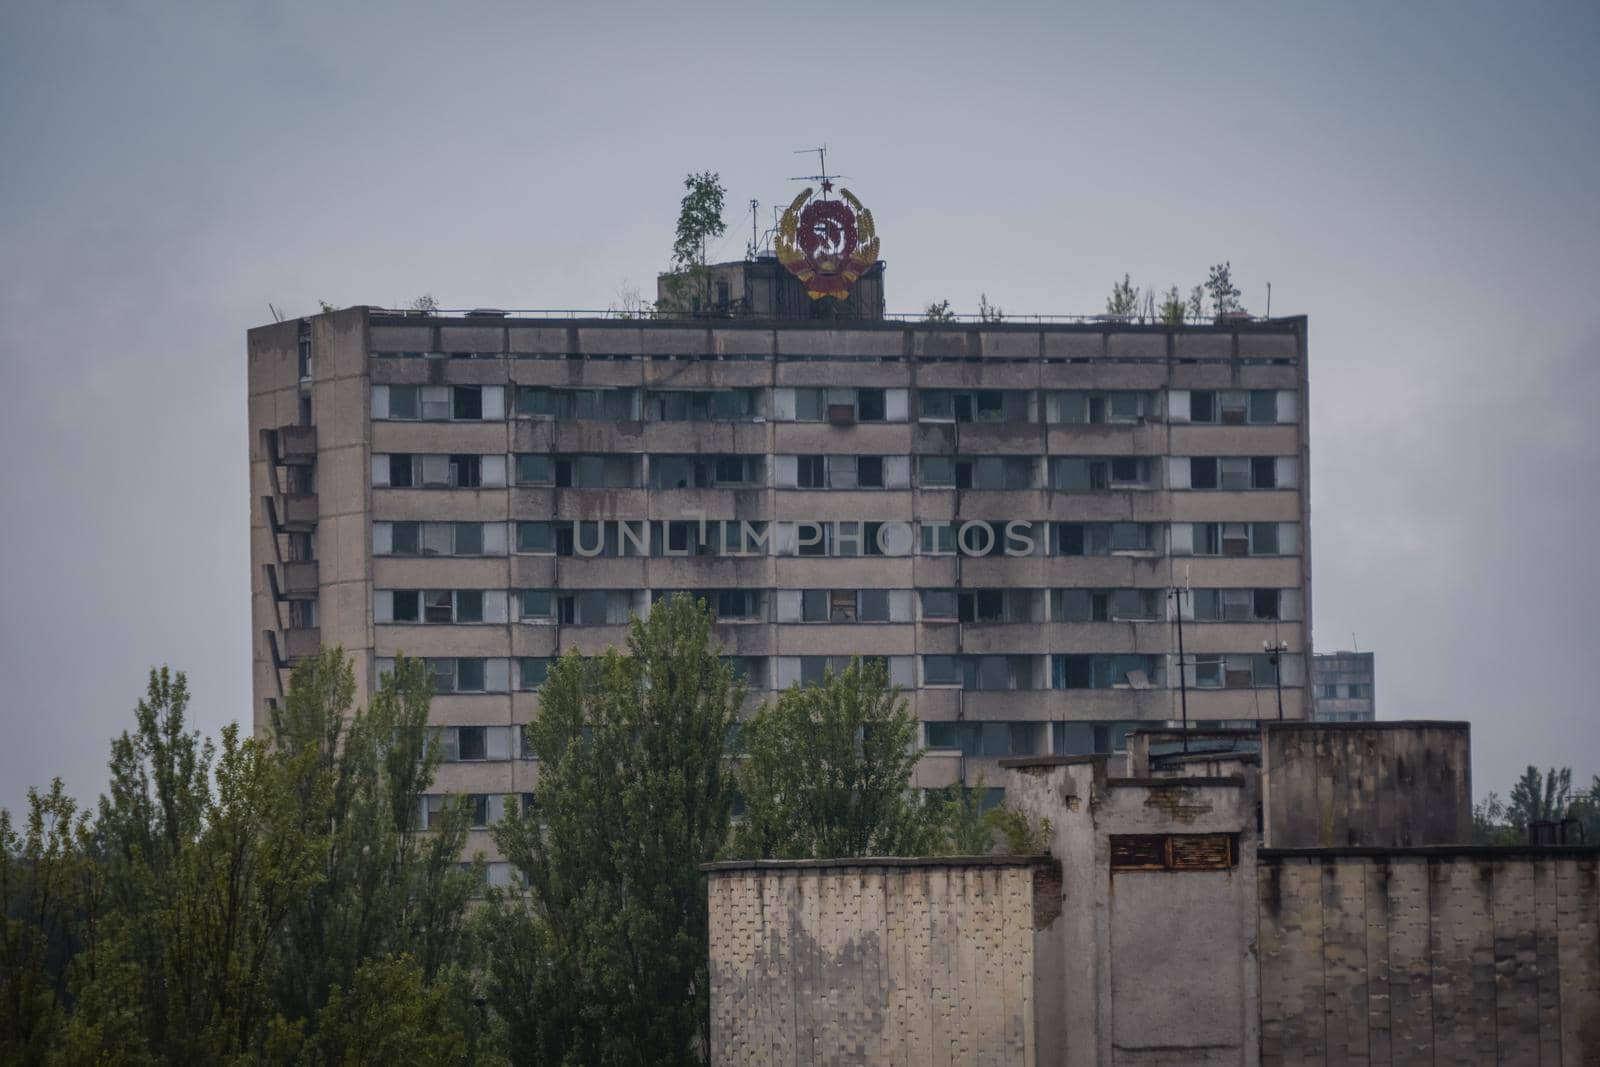 Pripyat, Ukraine - August 19, 2017: View to the central square of abandoned town Pripyat. by mosfet_ua